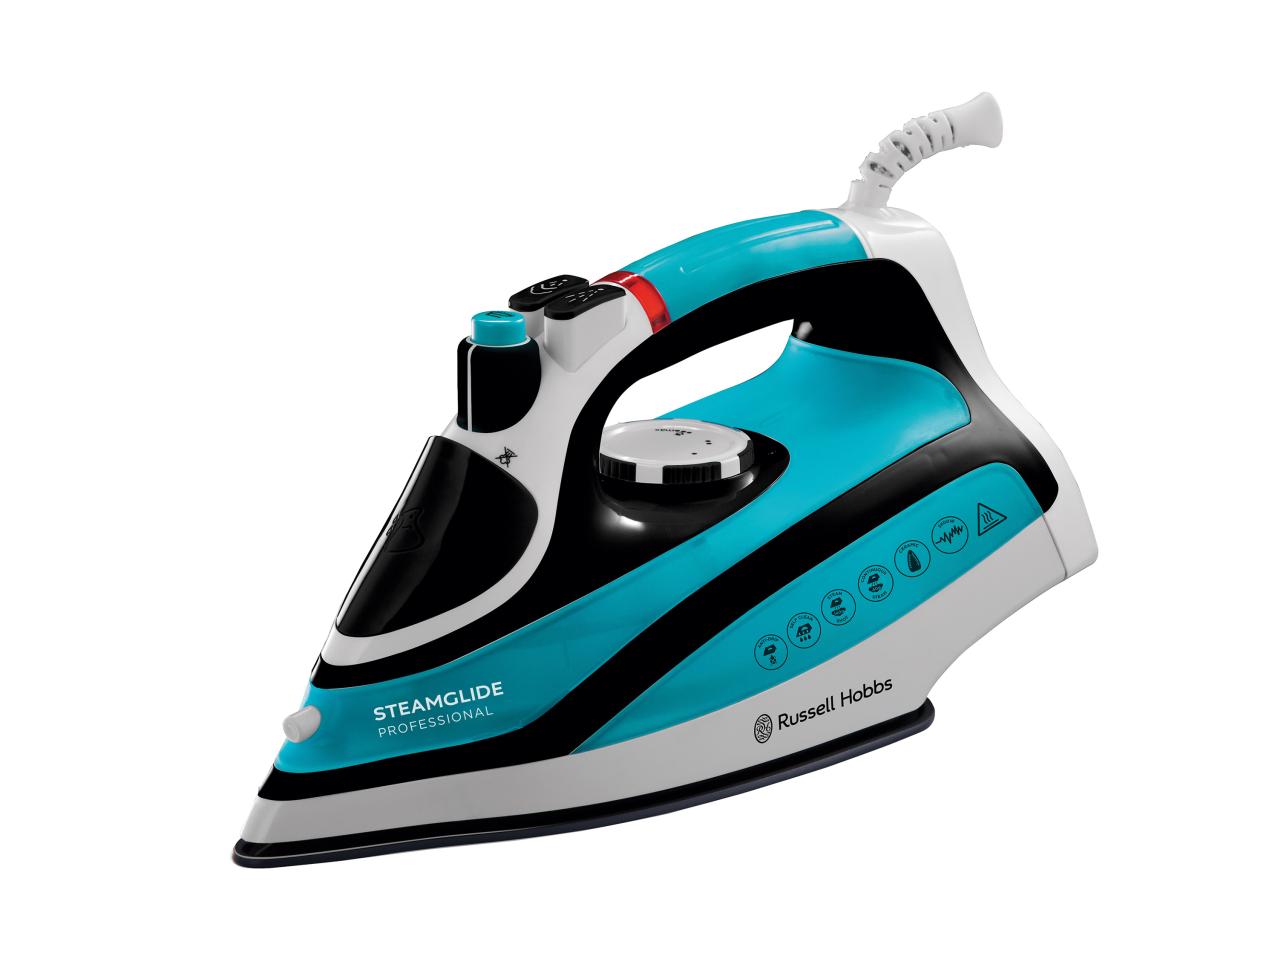 Russell Hobbs Steamglide Professional Iron 1